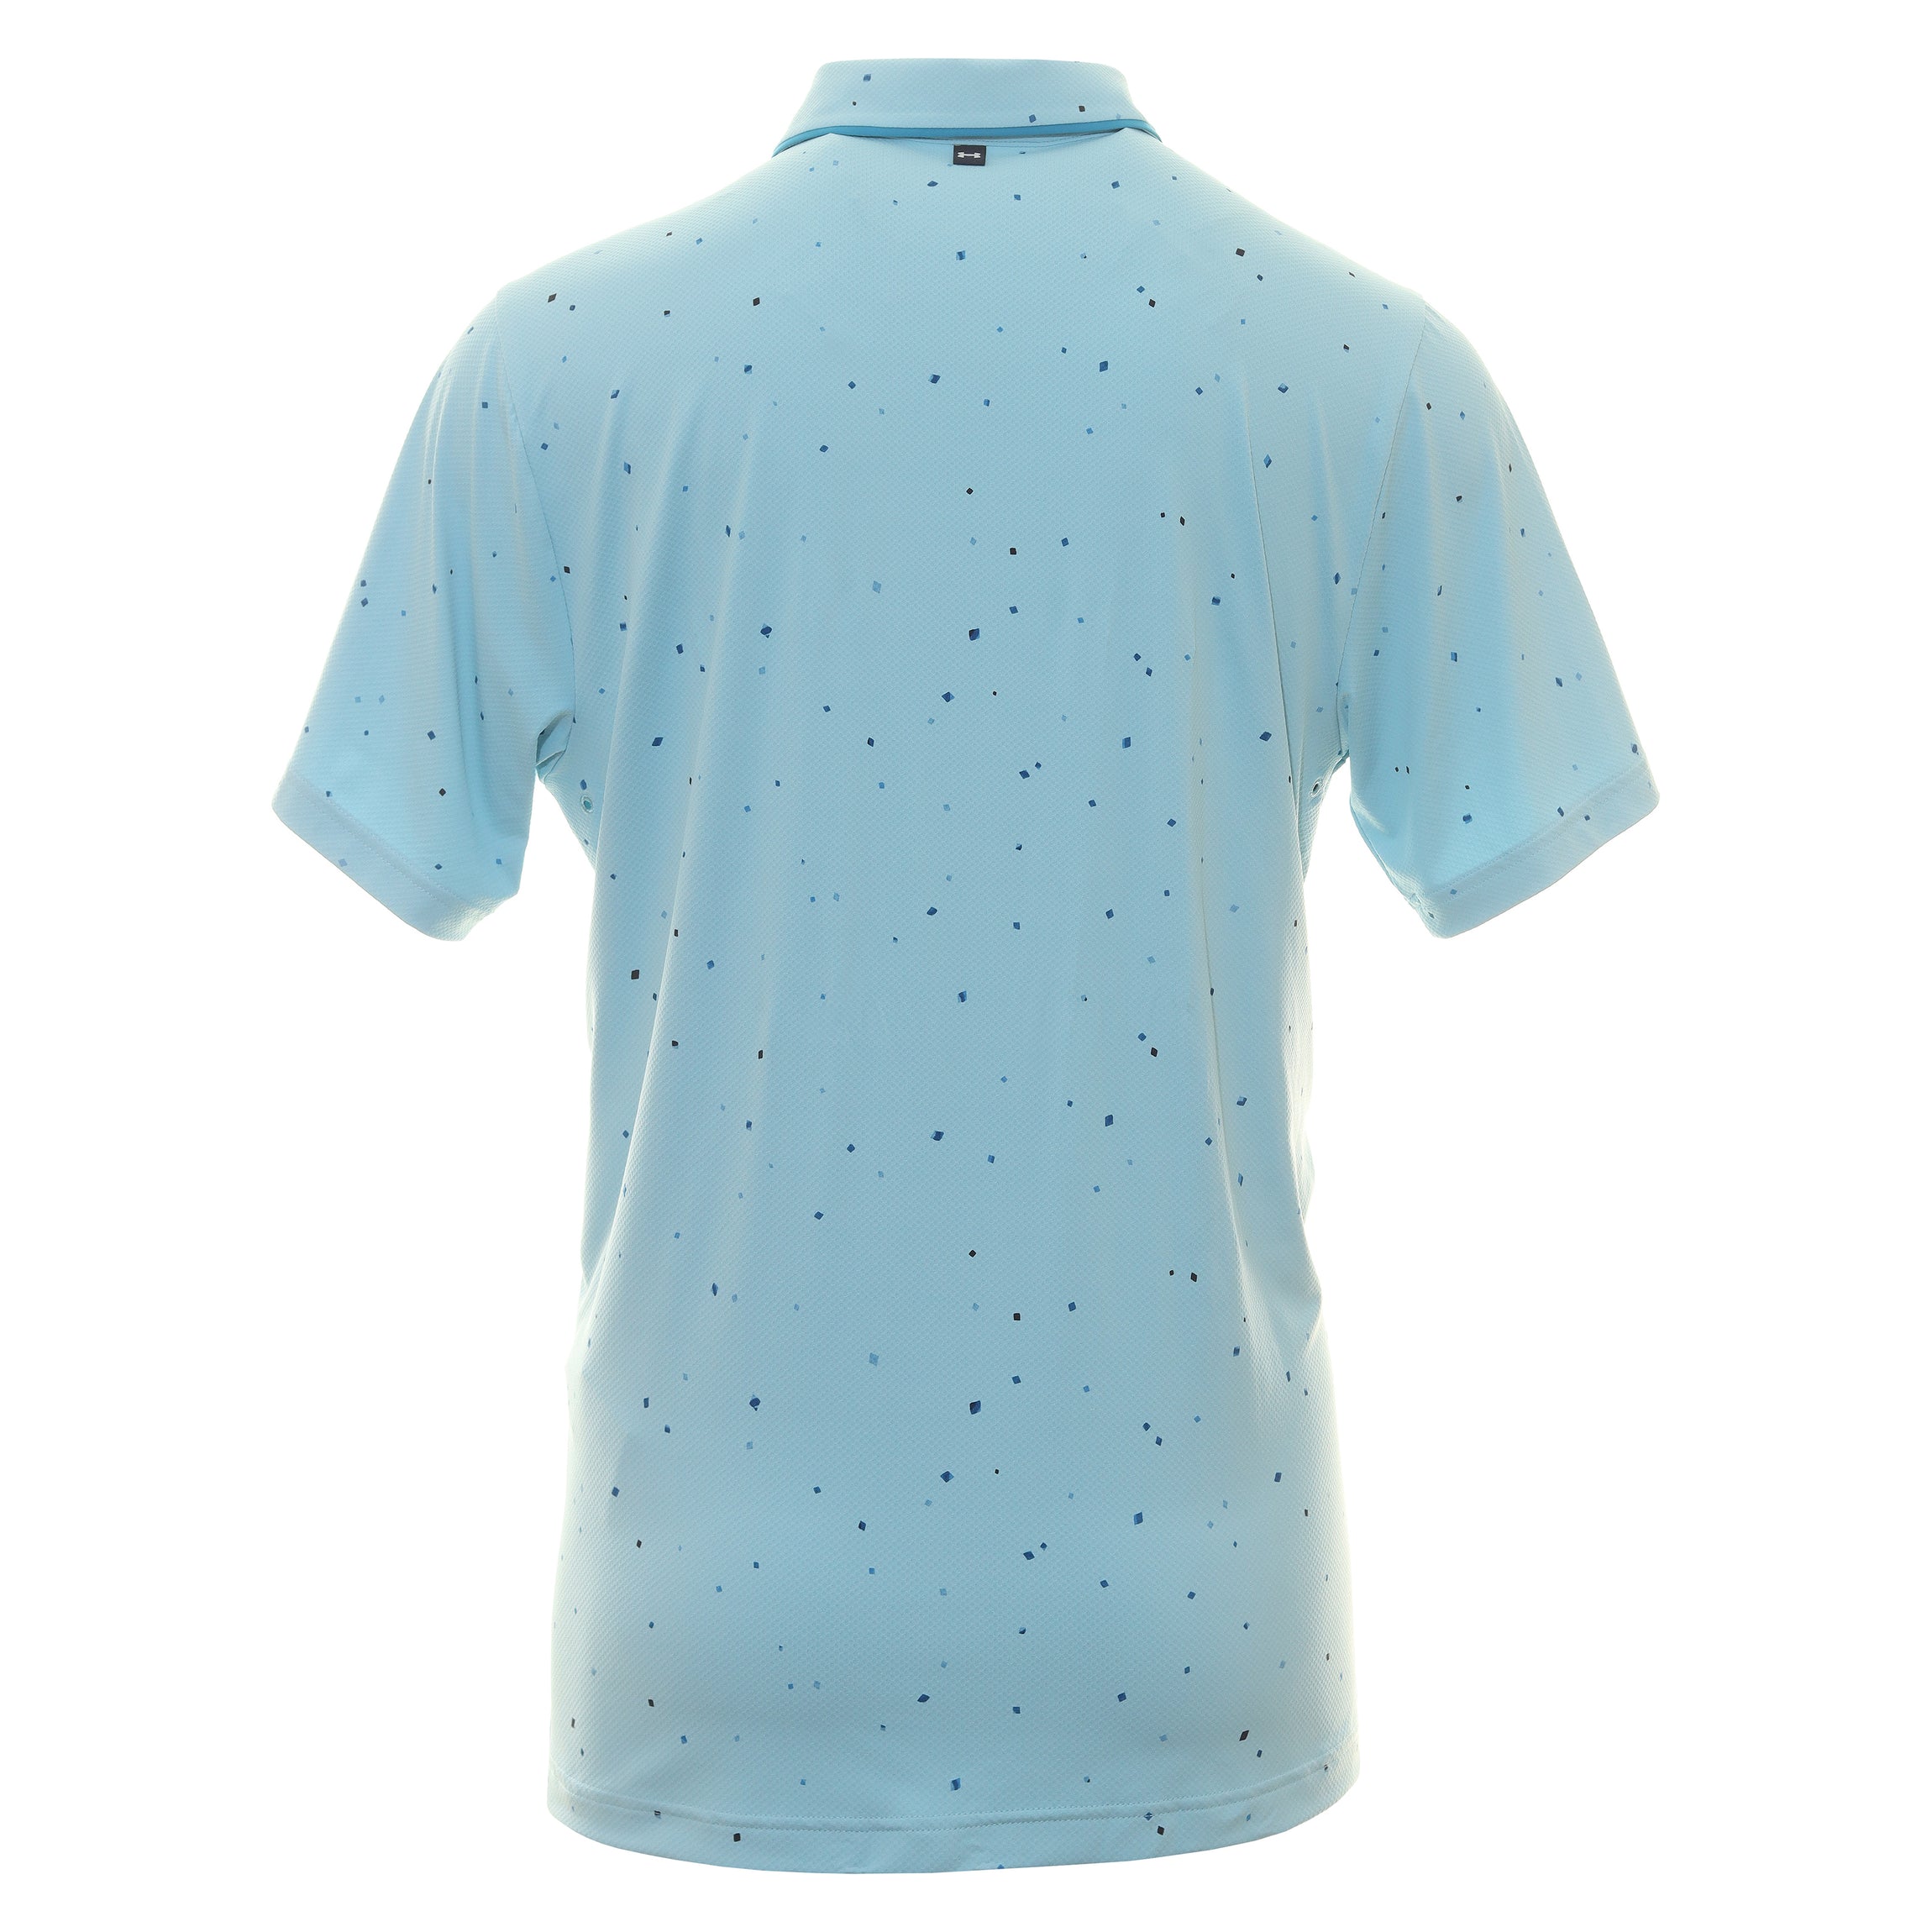 Under Armour Golf Iso-Chill Verge Shirt 1377366 Blizzard Cosmic Blue 490, Function18